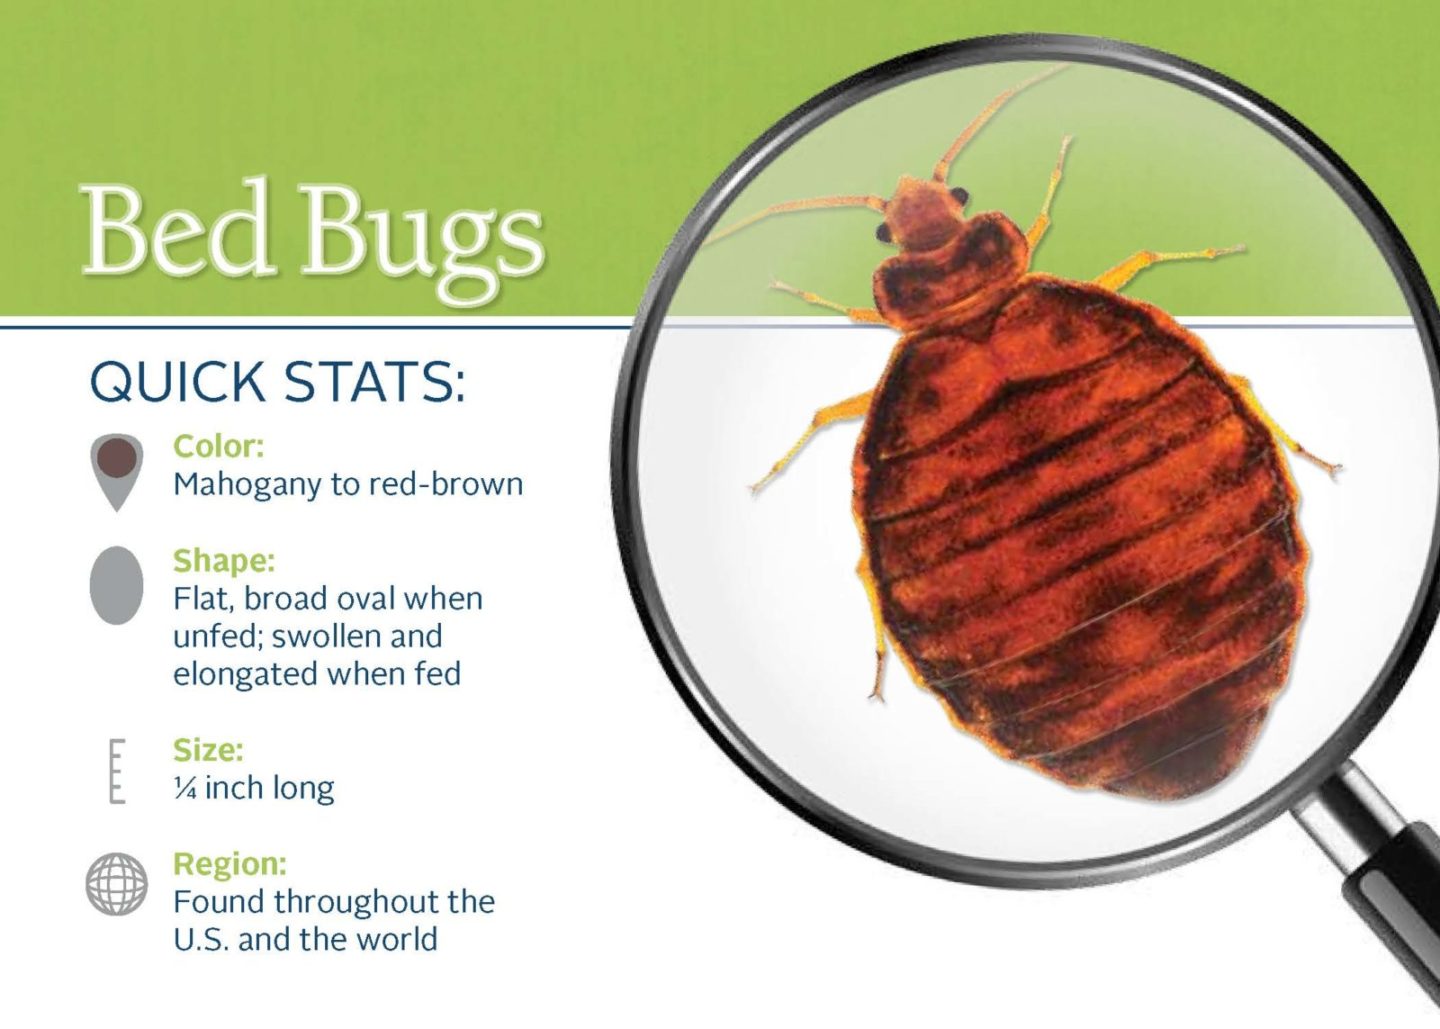 Bed bugs quick stats